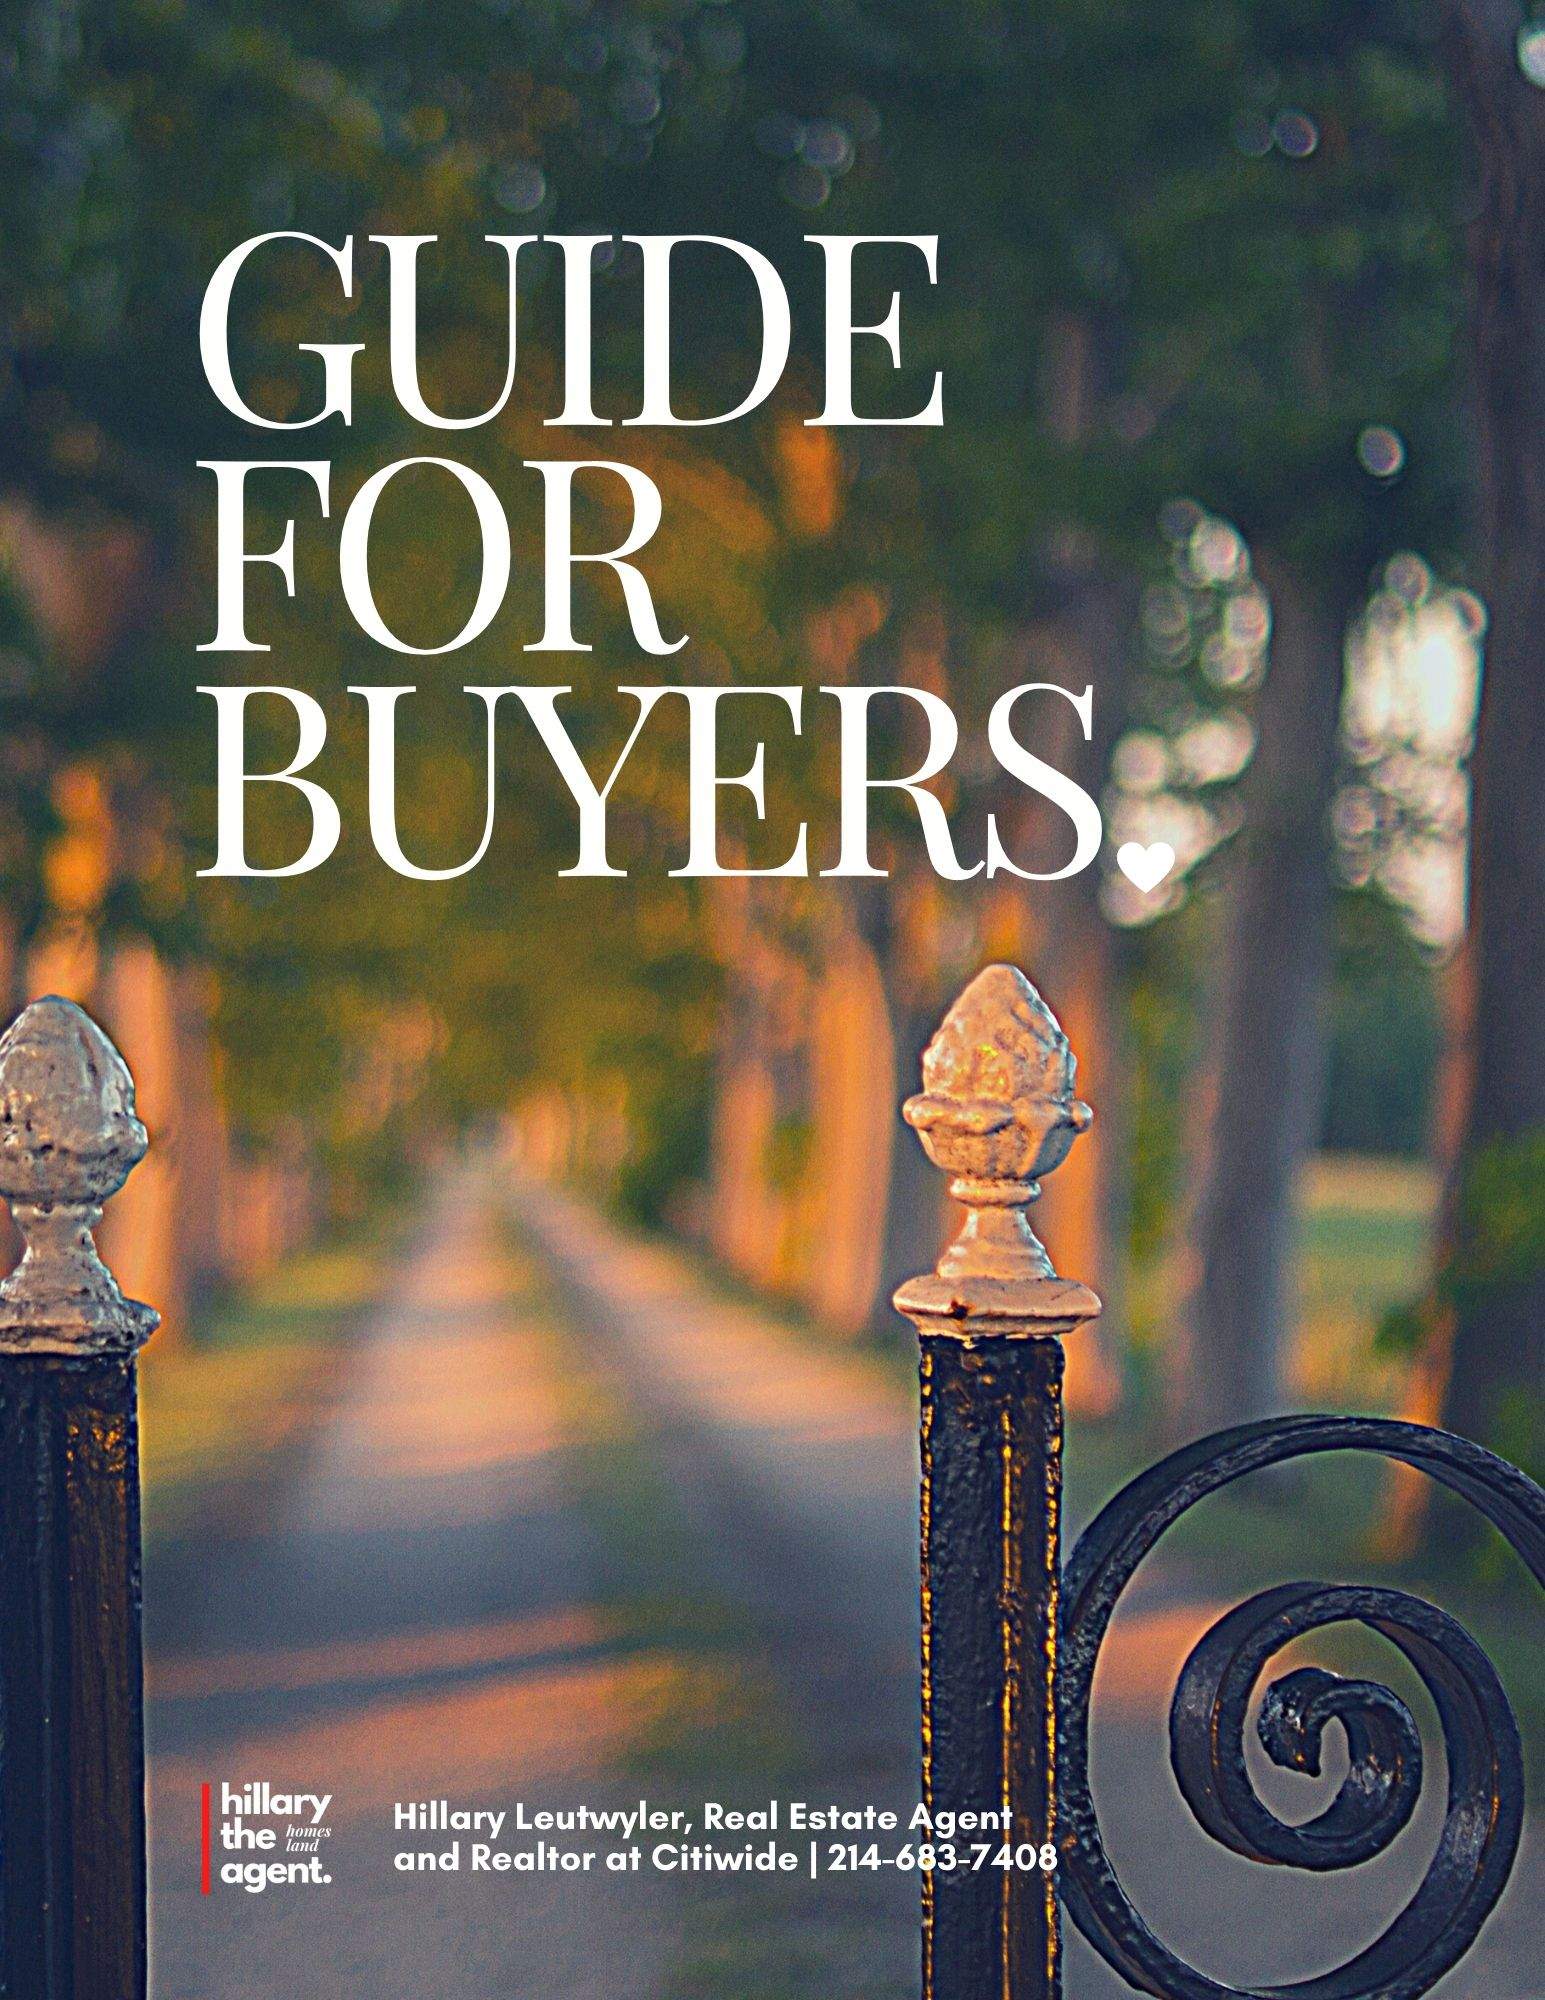 Request a special Guide For Buyers